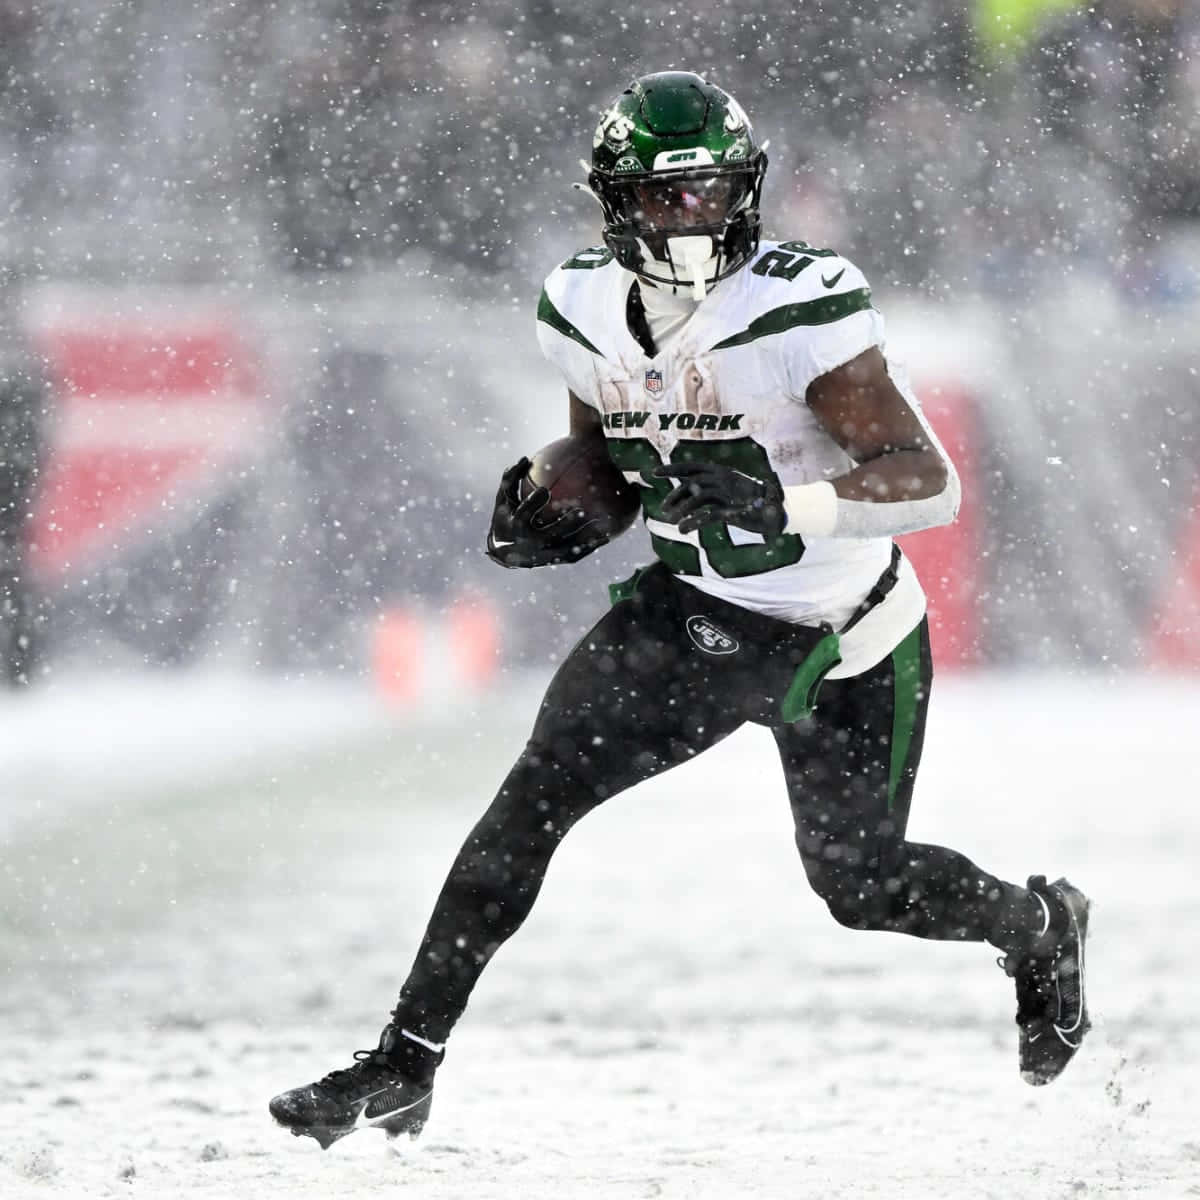 New York Jets Player Snowy Game Wallpaper